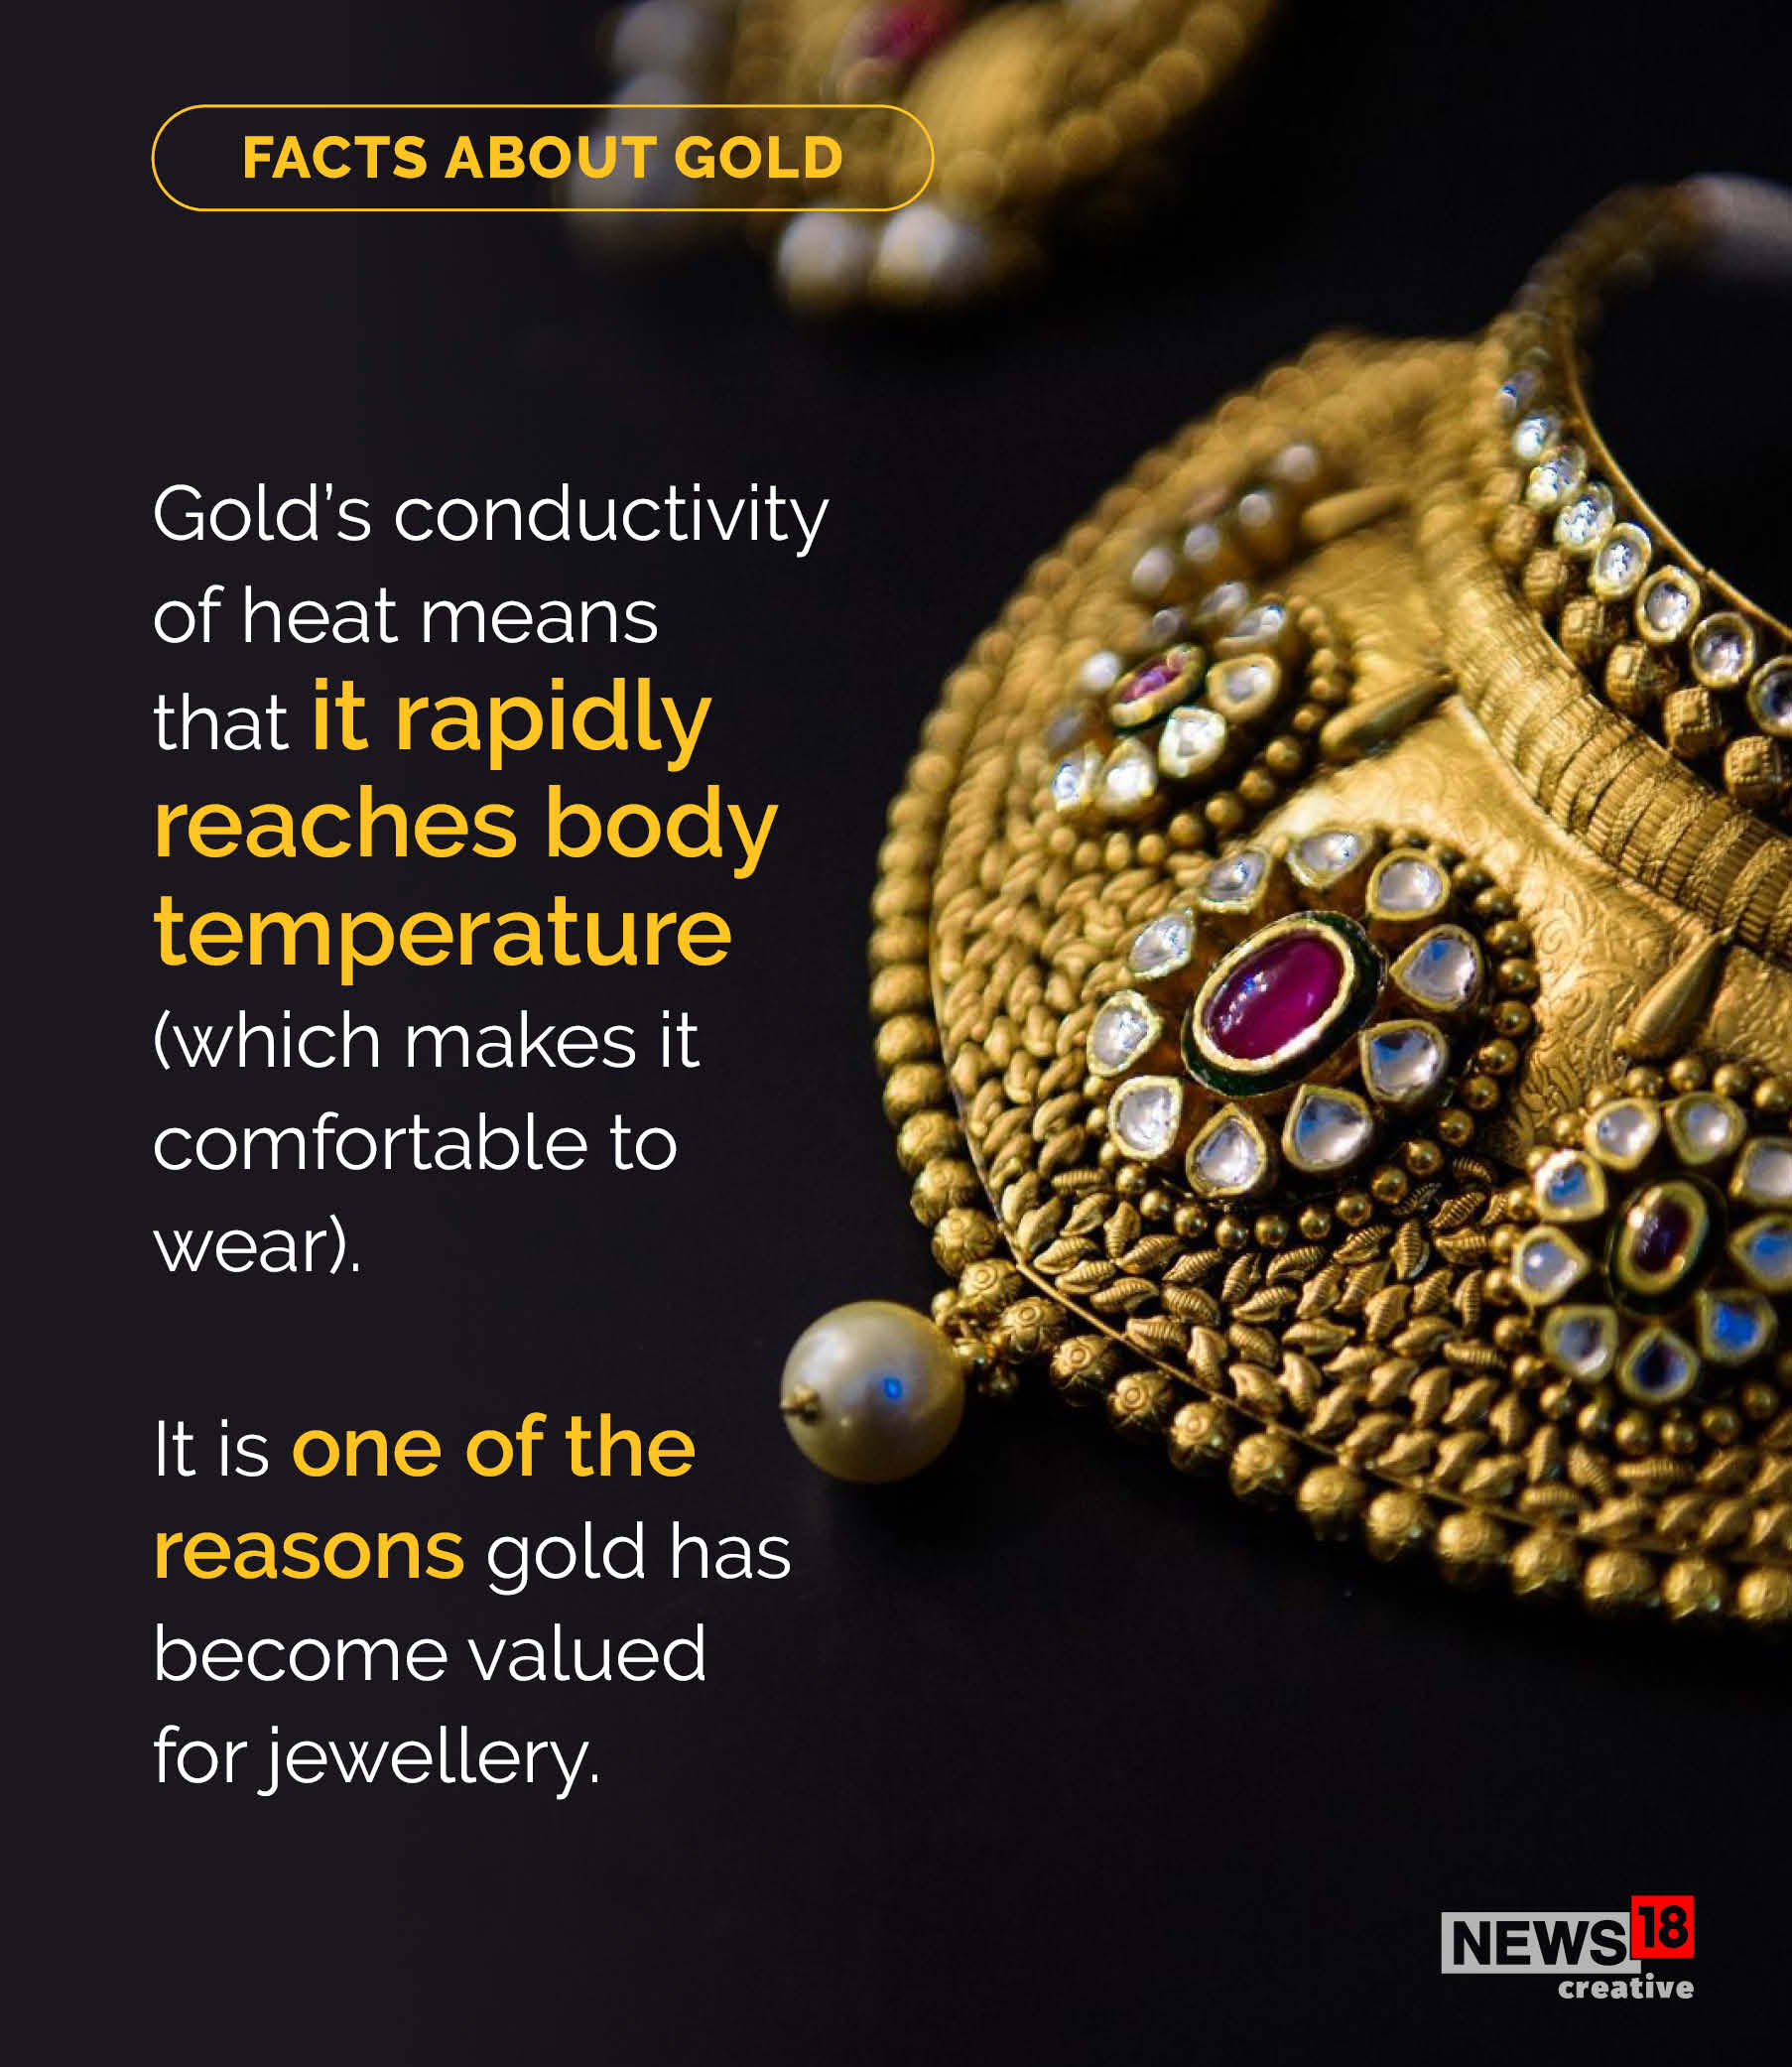 Dhanteras 2020: How much do you really know about gold?